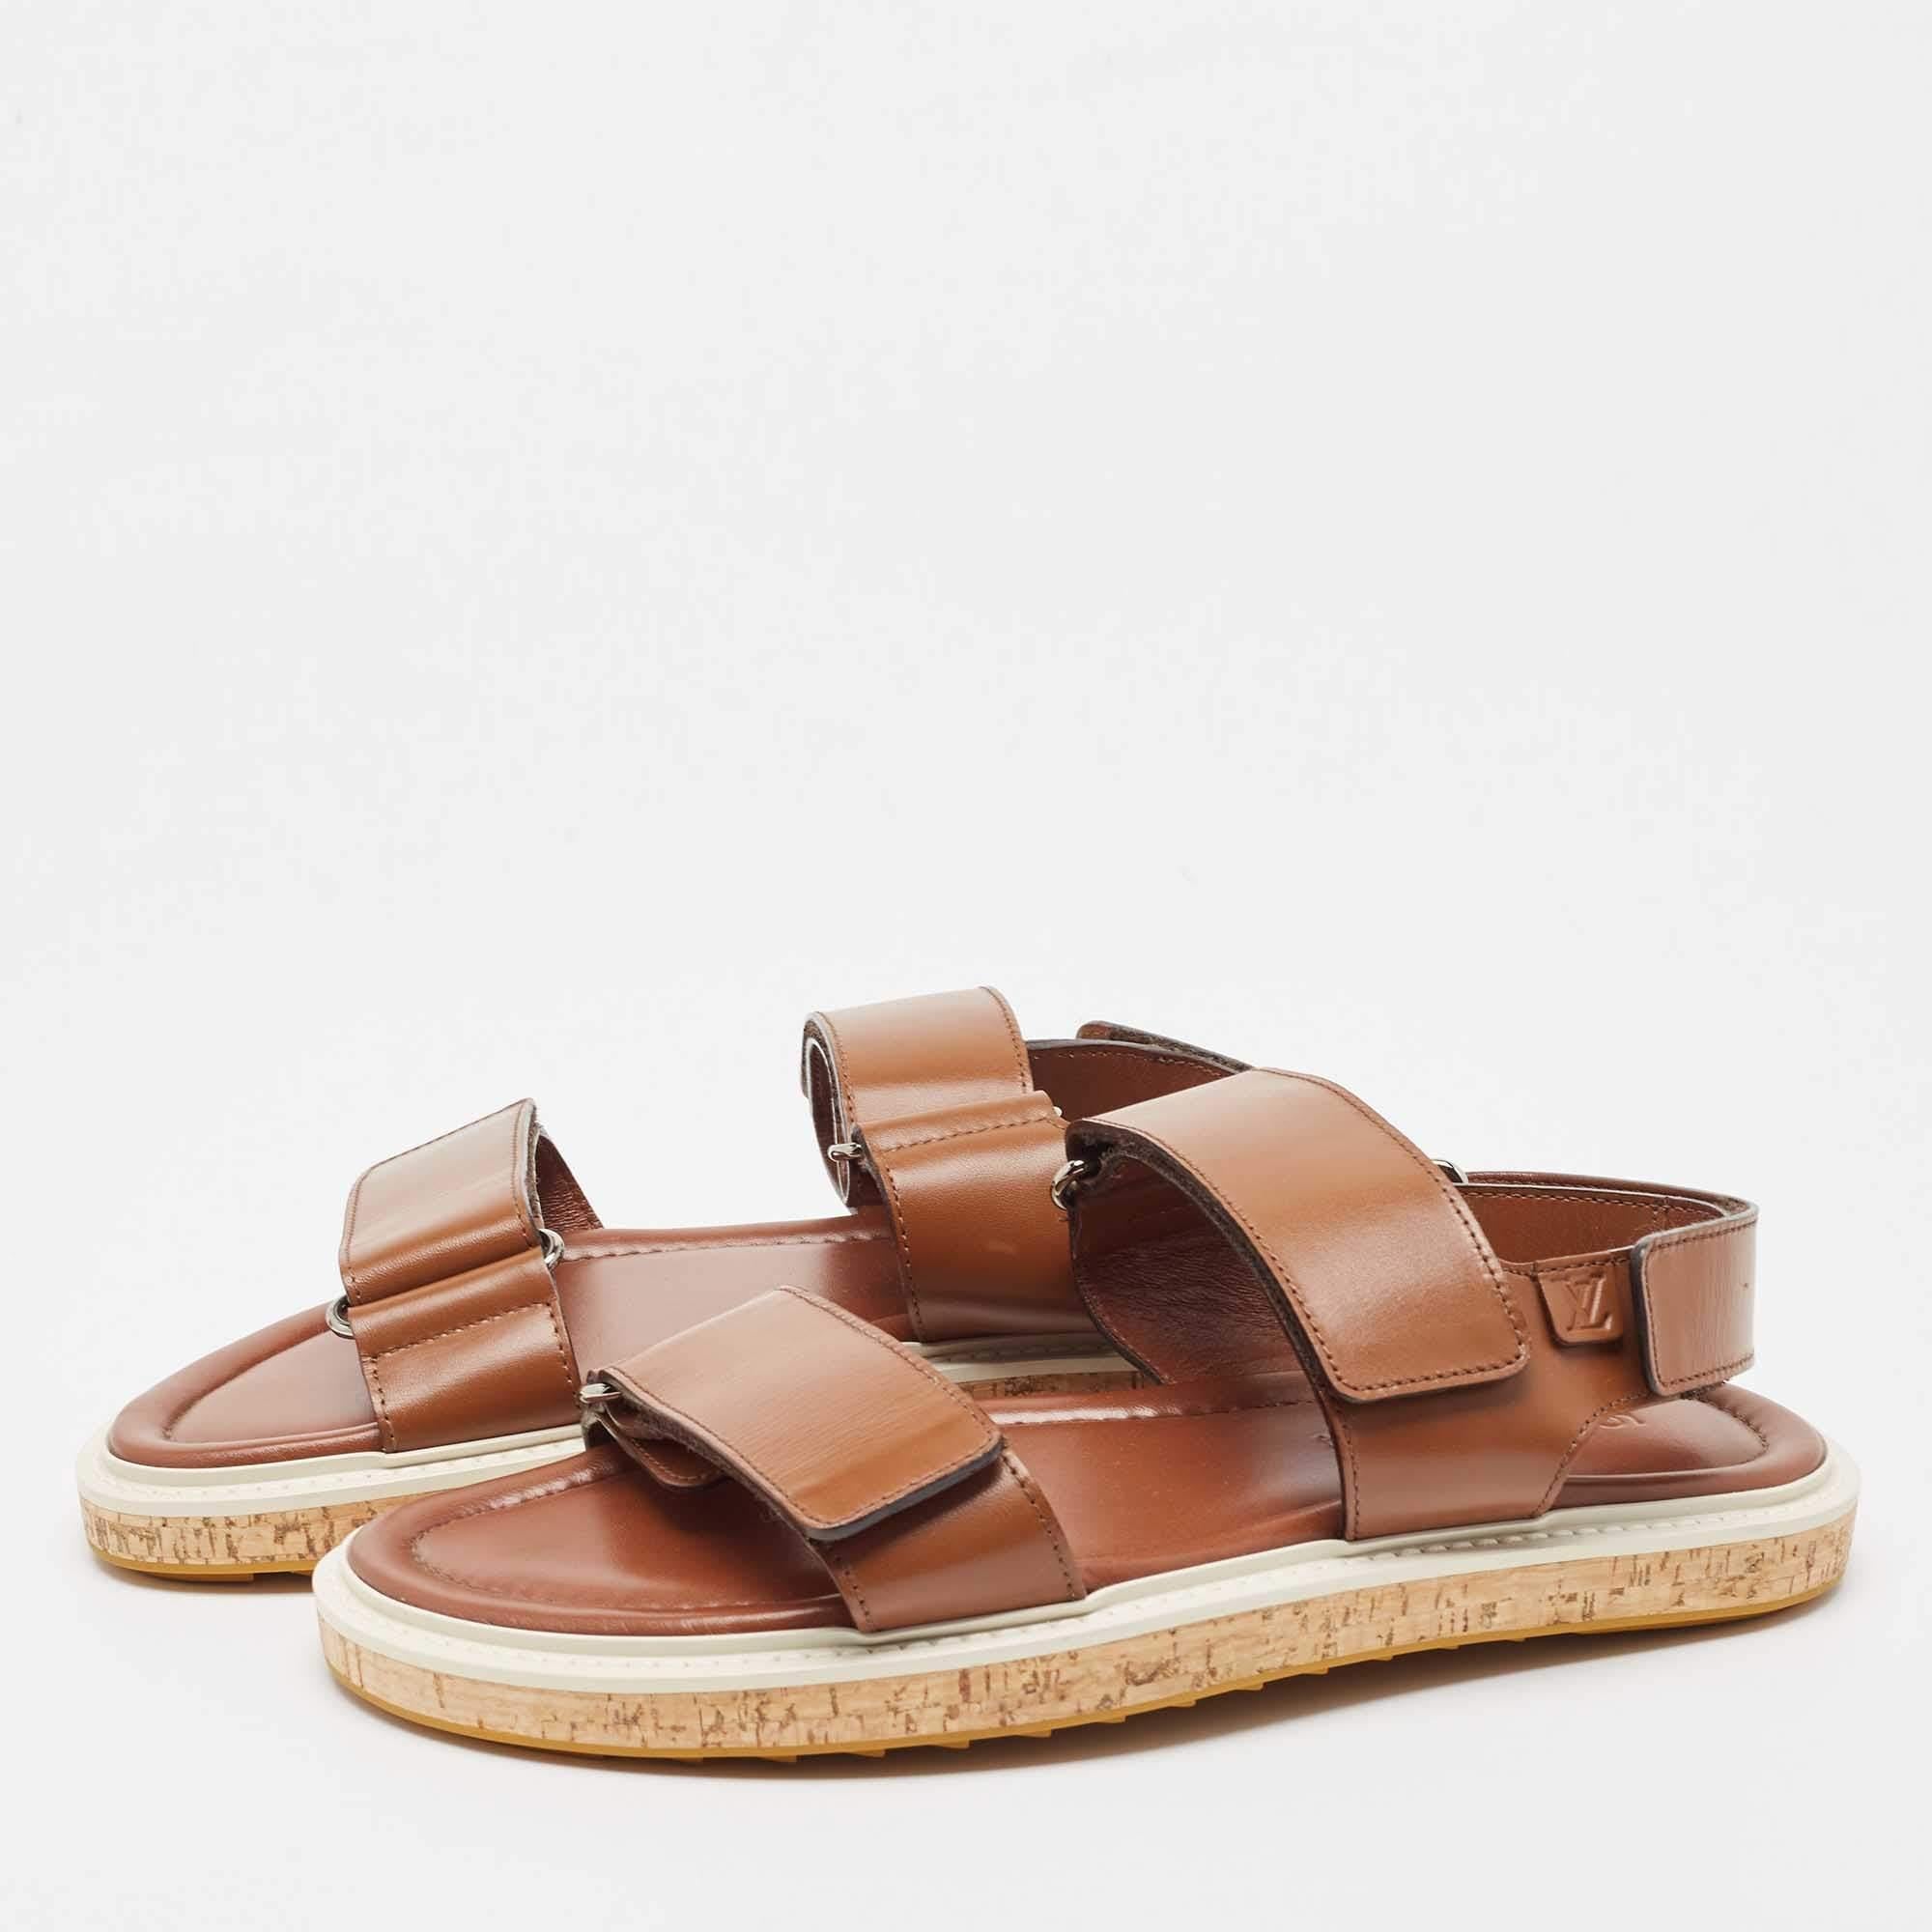 These sandals embody the perfect blend of edgy and timeless style. Crafted from quality materials, these shoes will offer you the perfect height for a sophisticated look.


Includes

Original Dustbag